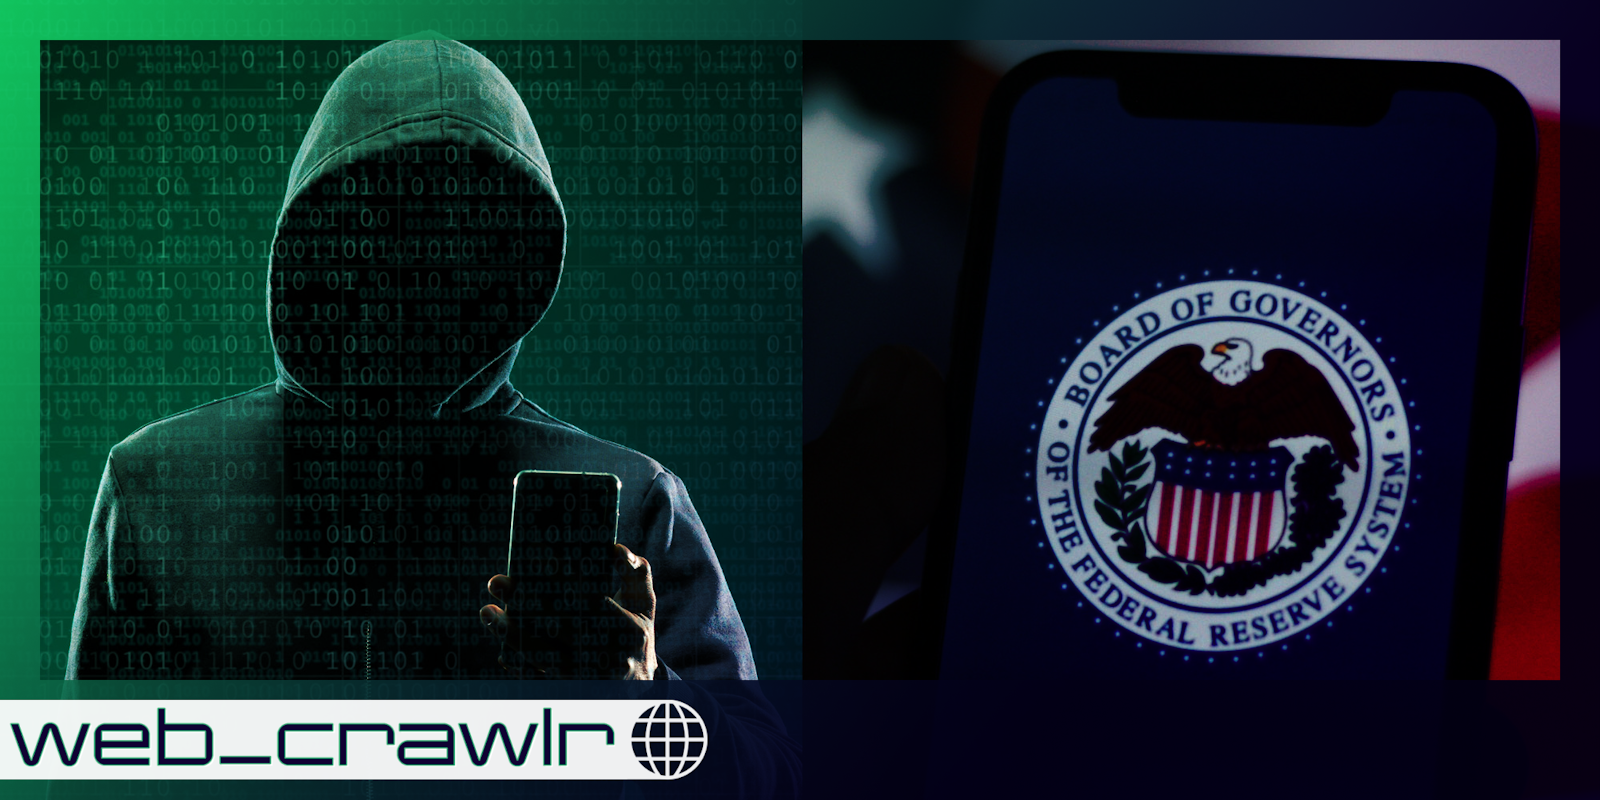 A hacker next to a phone with the Federal Reserve logo on it. The Daily Dot newsletter web_crawlr logo is in the bottom left corner.